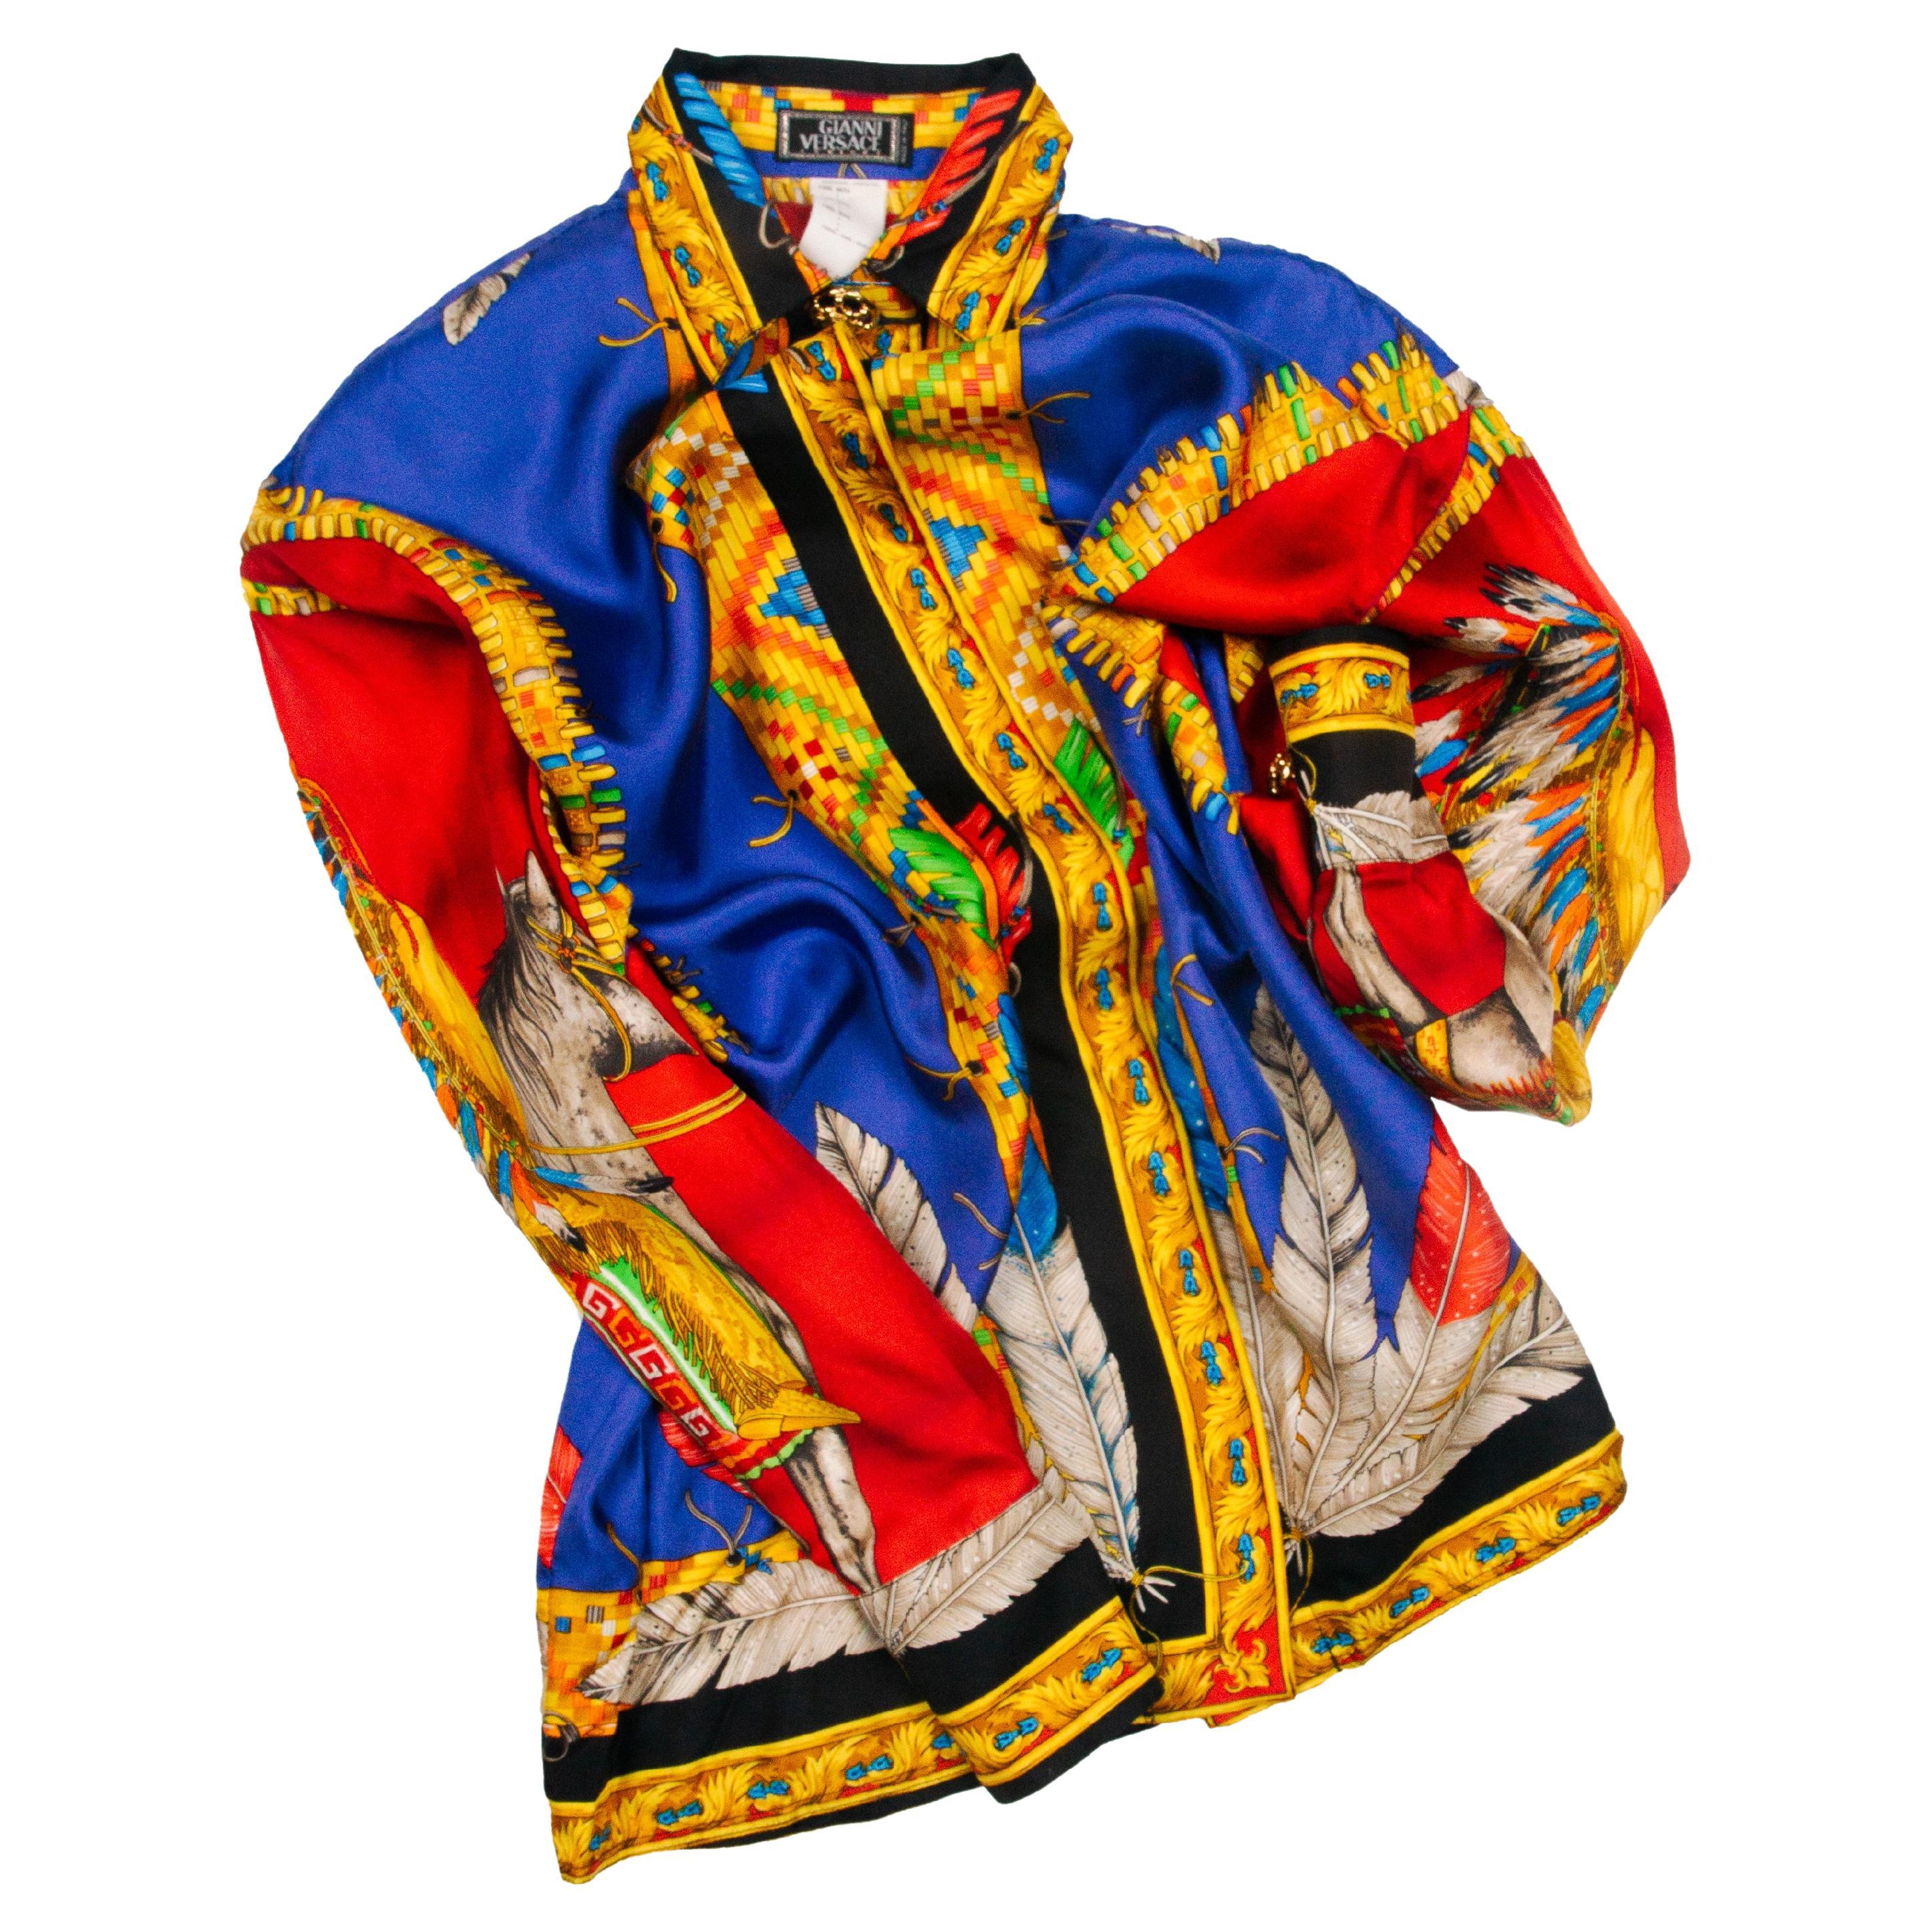 Presenting Created by Gianni Versace for the 1992 F/W collection 'Miss S&M', this bright silk shirt features patterns inspired by Native Americans, feathers, and a large image of a Native American tribal man on horseback. Boasting bright blue, red,